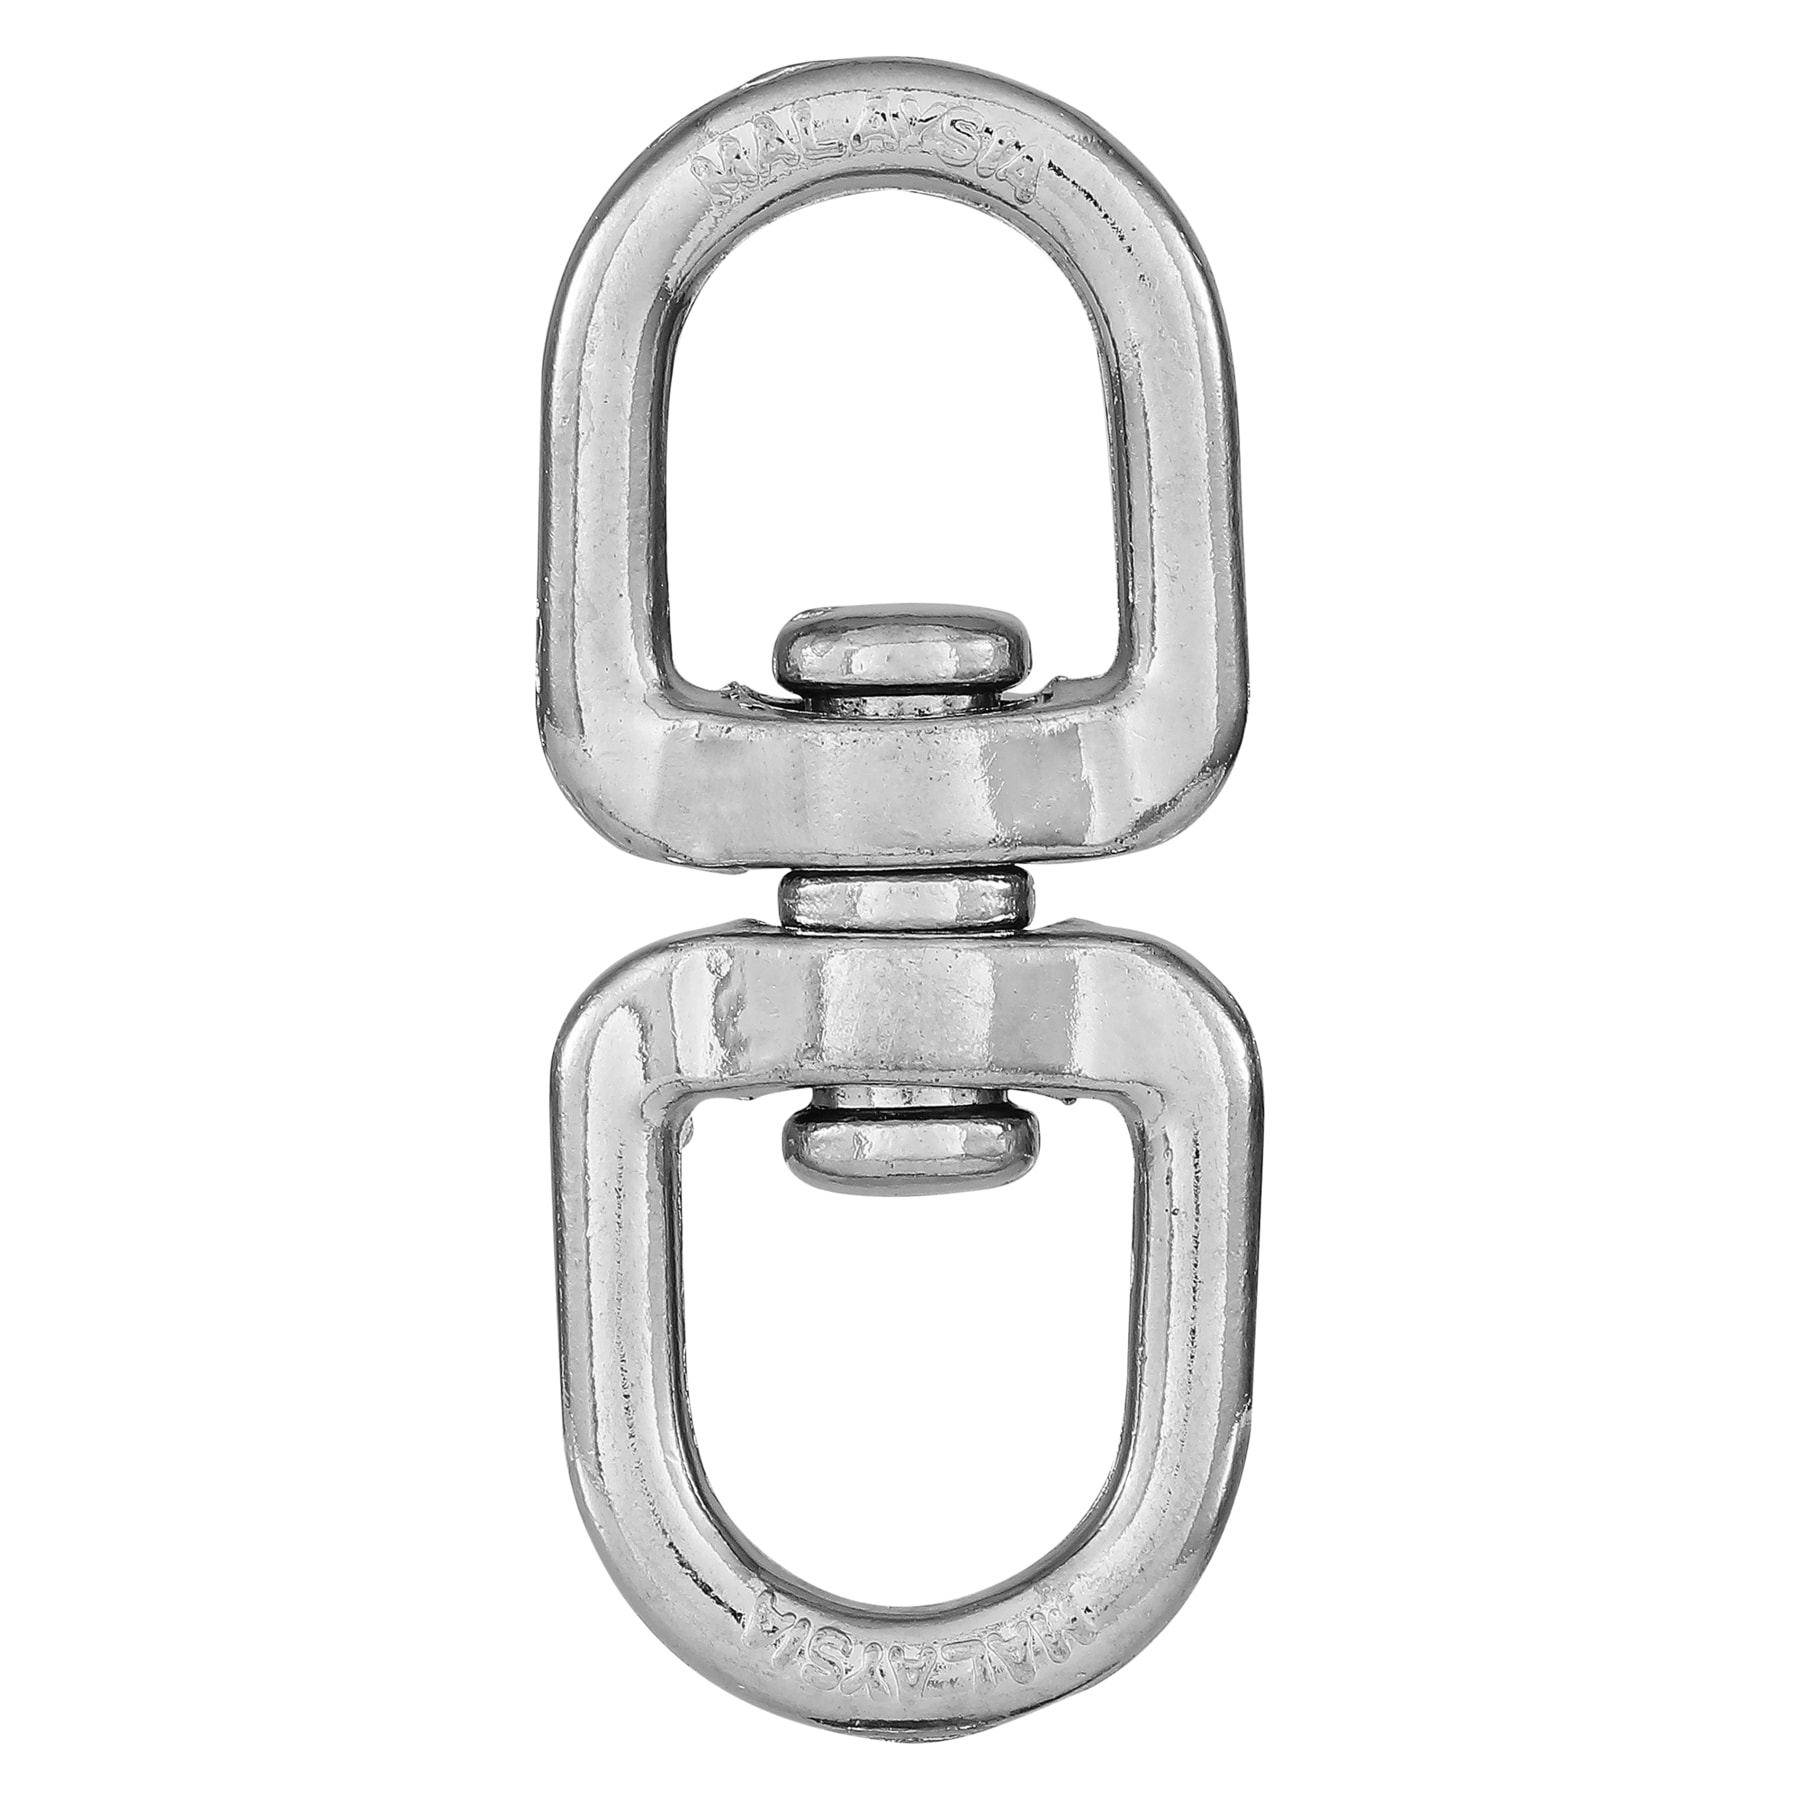 Swivel Chain Accessories at Lowes.com